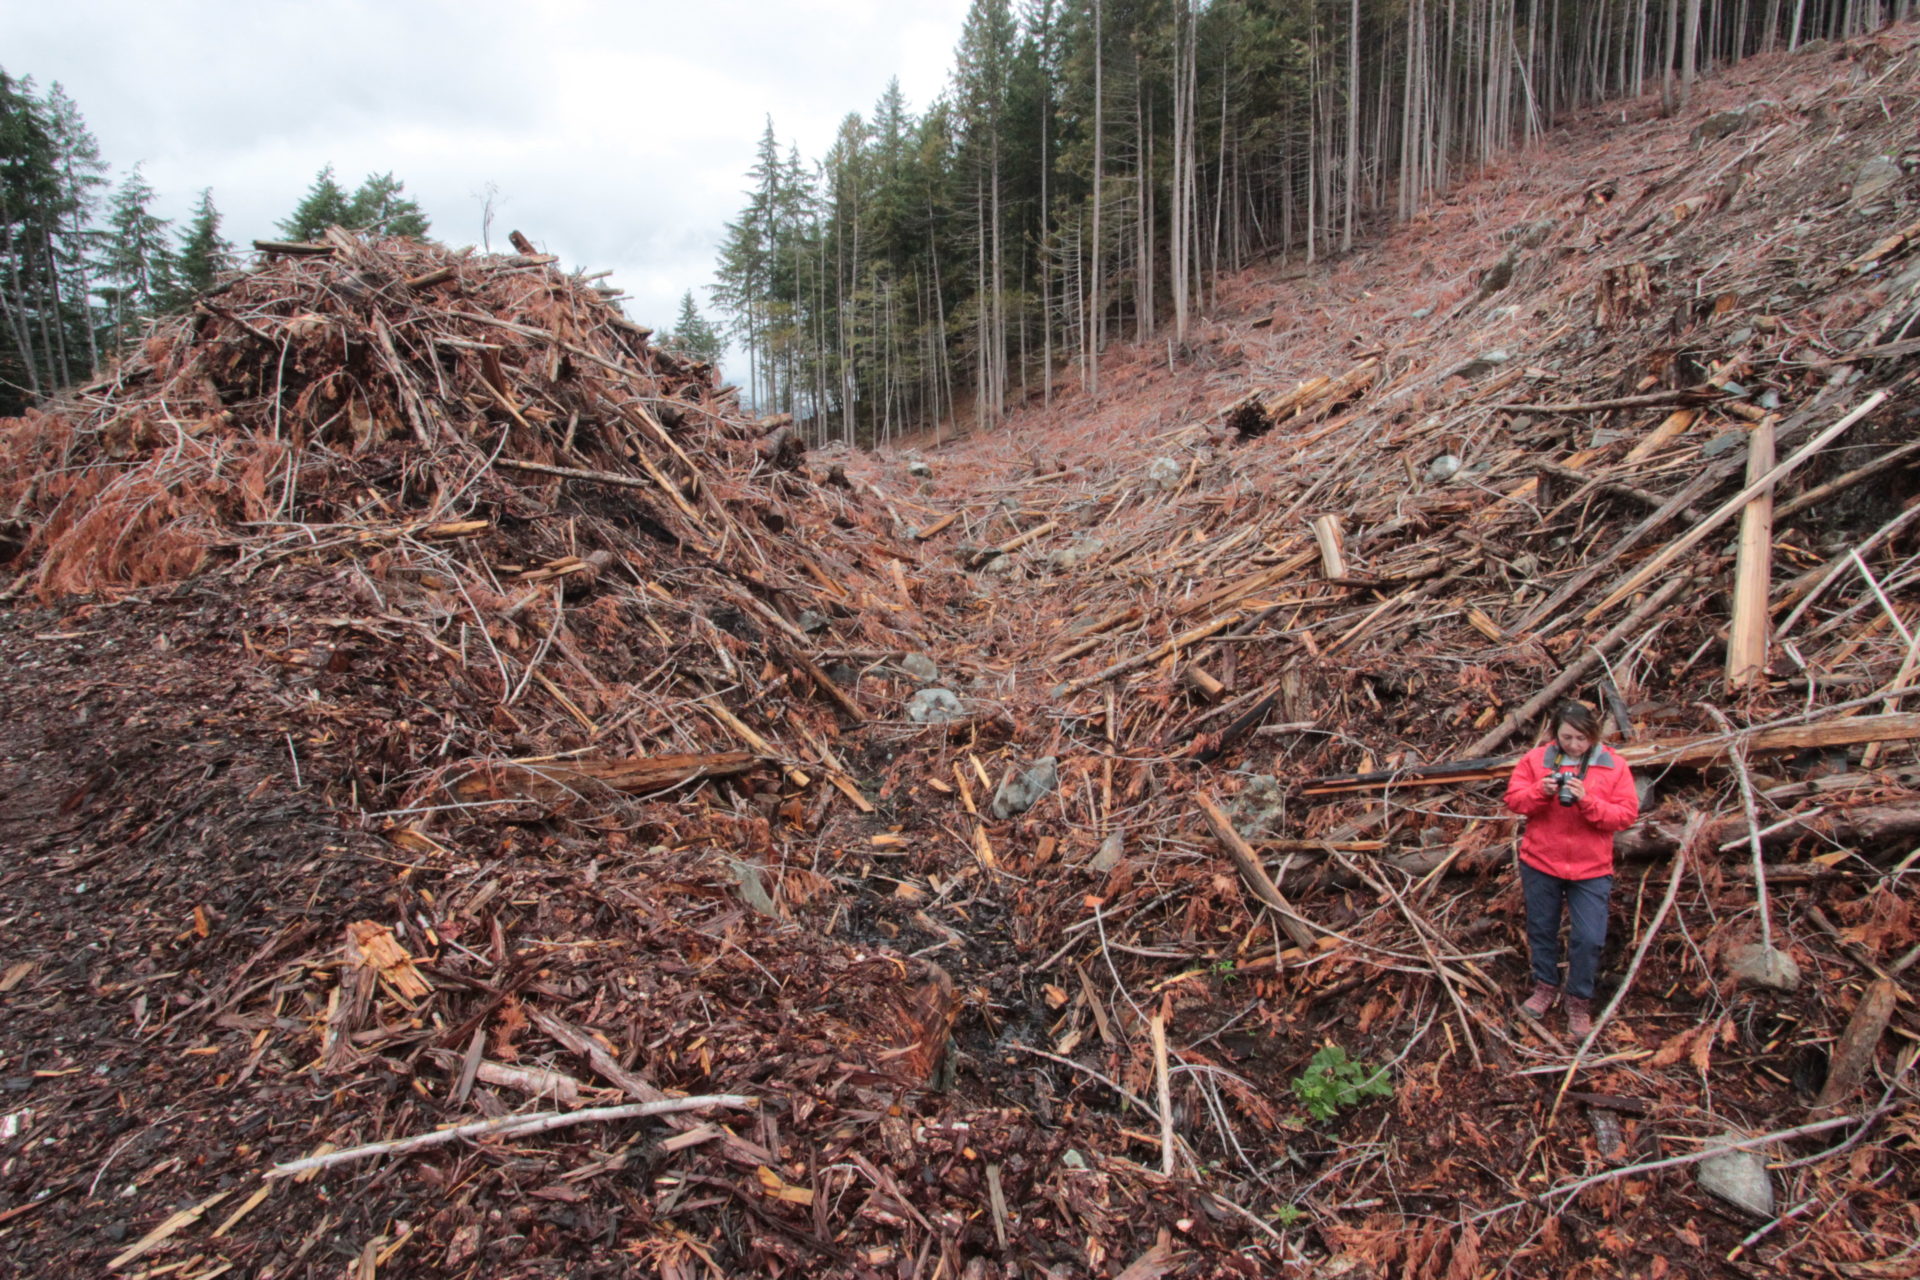 Charlotte Dawe, conservation and policy campaigner with the Wilderness Committee, stands in the Karen Creek clearcut. Photo: Wilderness Committee